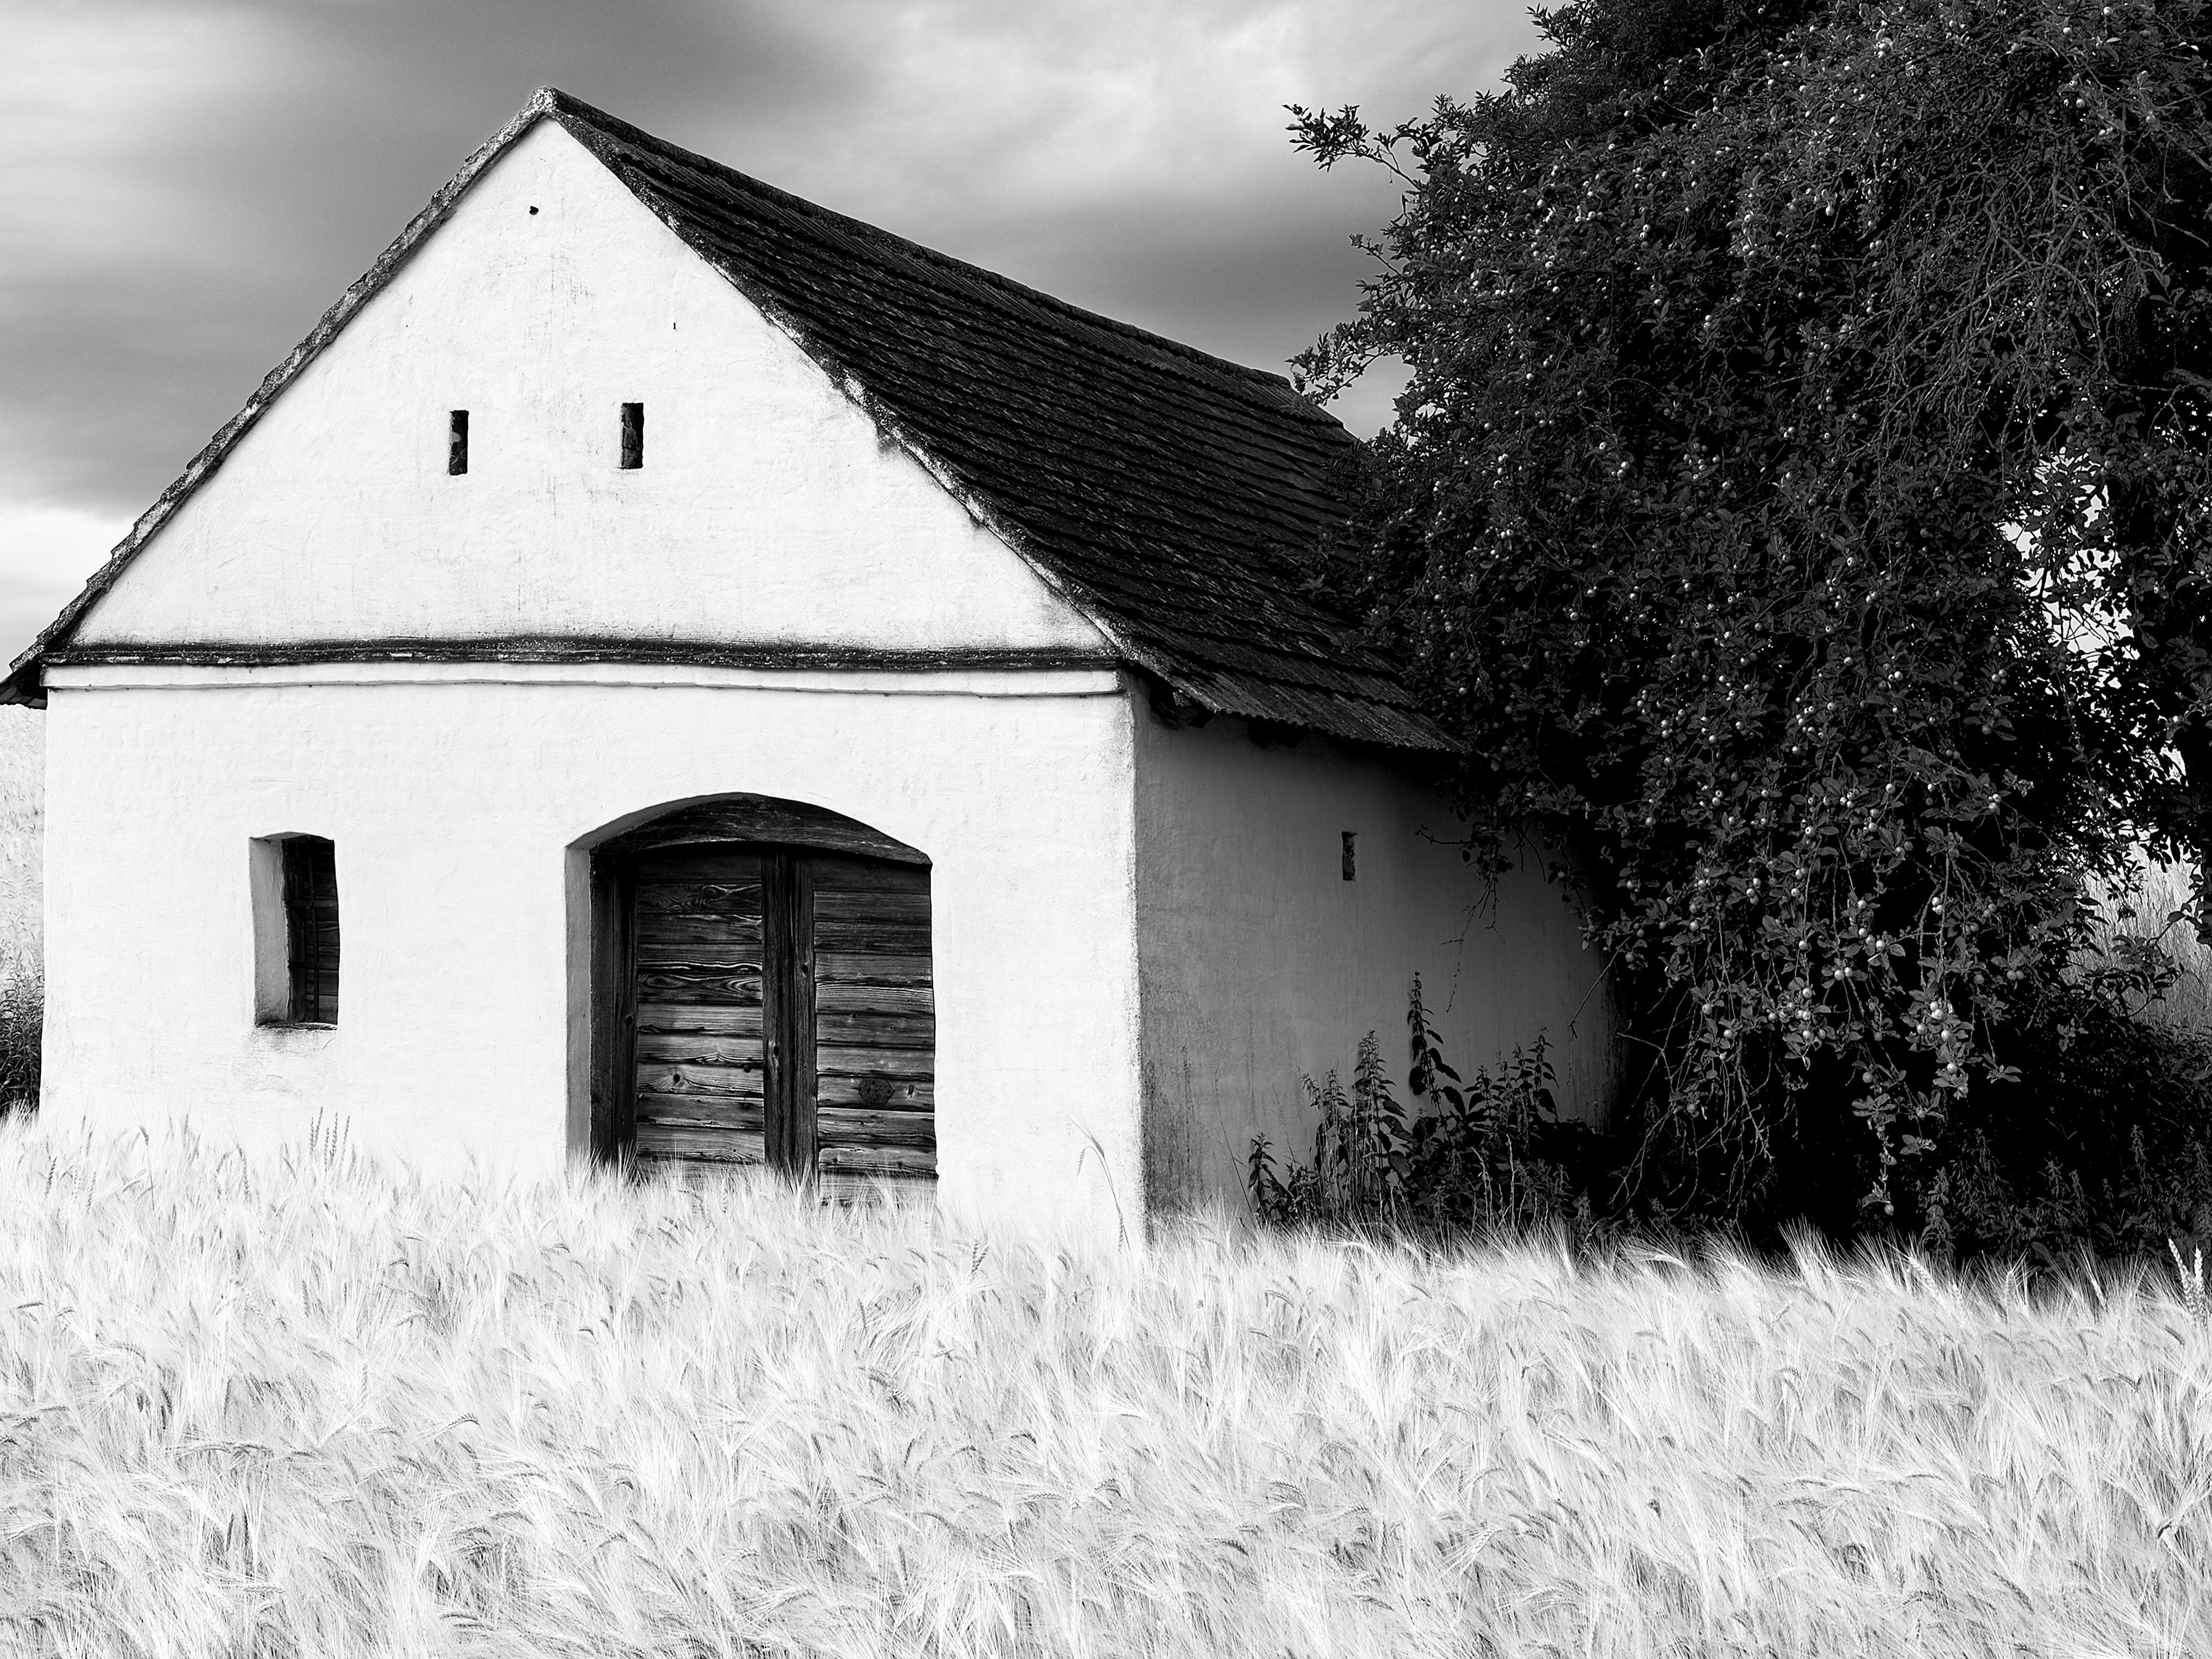 Wine Press House, wheat field, heavy clouds, black & white landscape photography For Sale 4